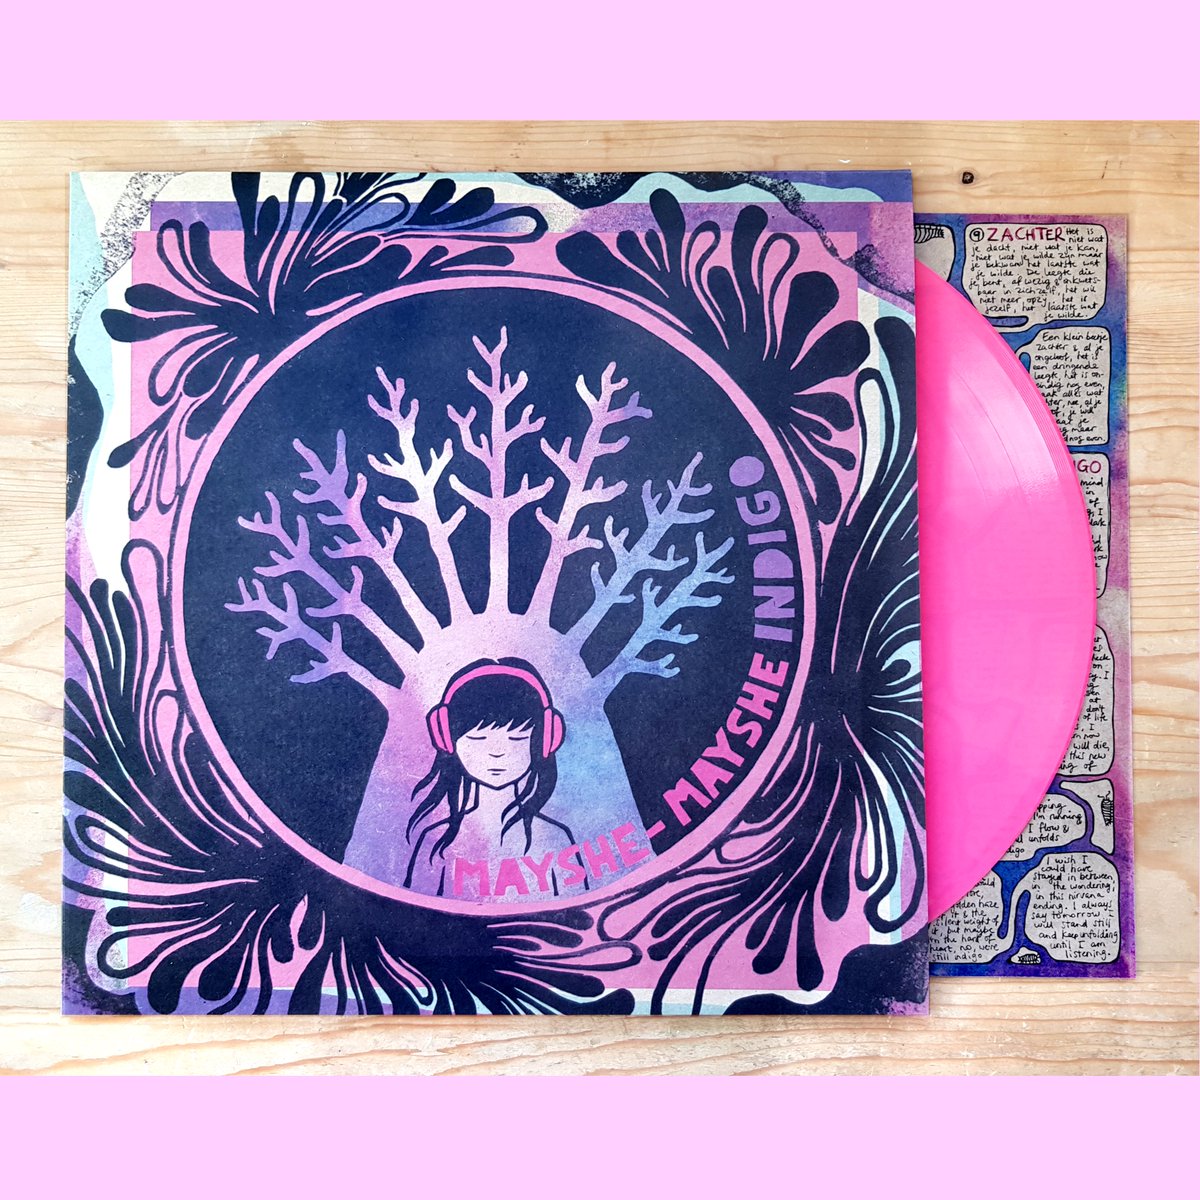 Here is the new edition of my Indigo album on vinyl 💜 available now from my website mayshe-mayshe.com/shop-indigo It comes on pink or turquoise colour vinyl & includes a new artprint (see picture!). I'll sign any copies purchased in this first week 💜